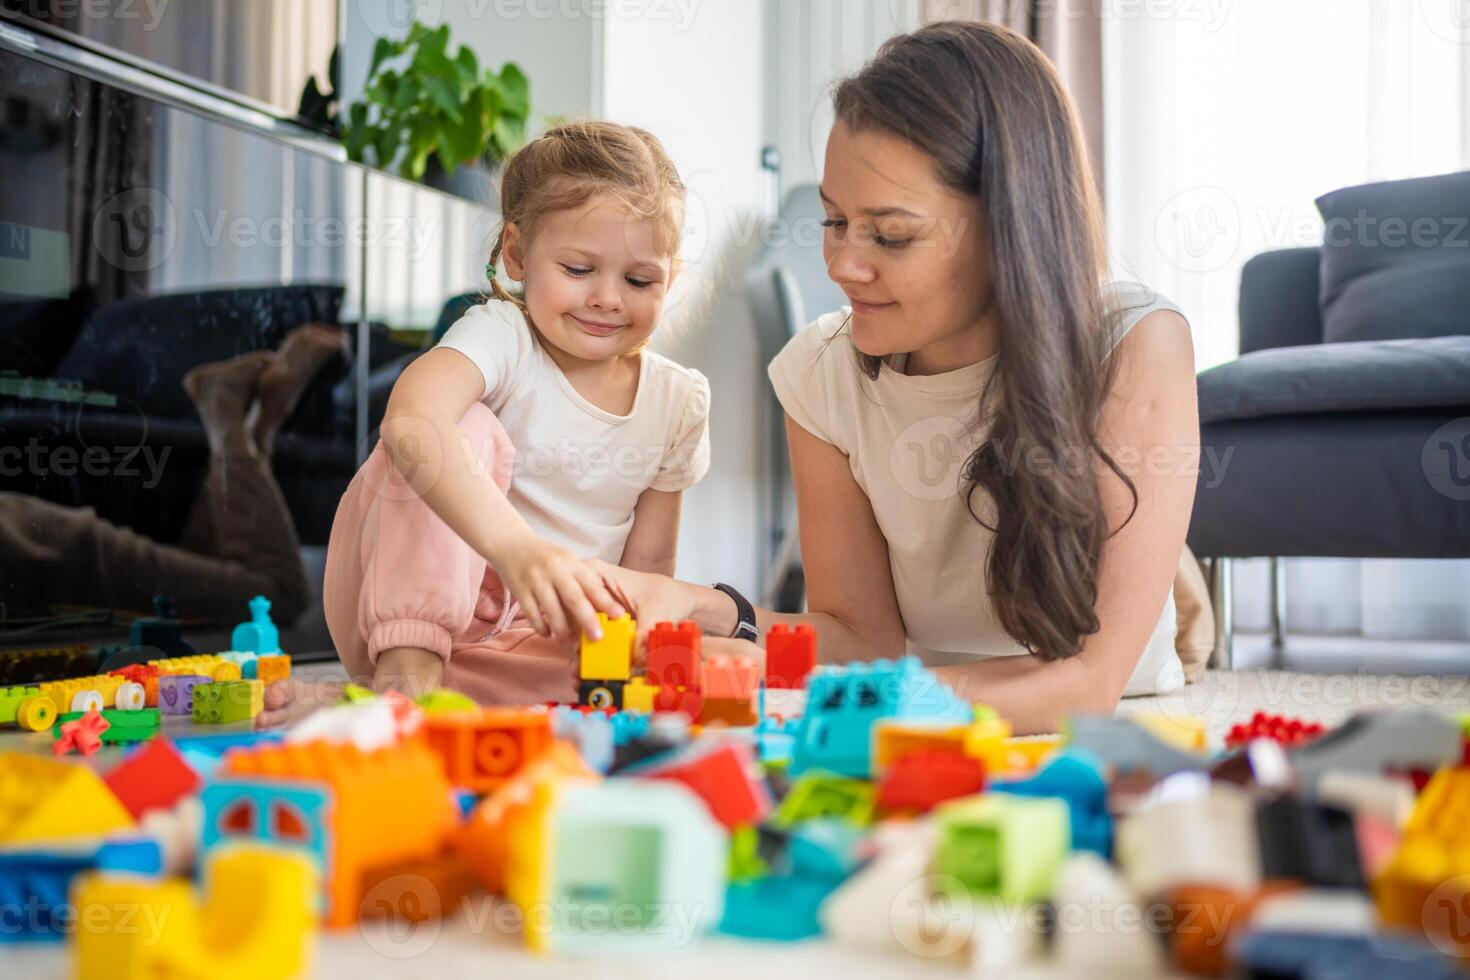 Little girl play with constructor toy on floor in home with mom or woman babysitter, educational game, family at home spend leisure activities time together concept photo